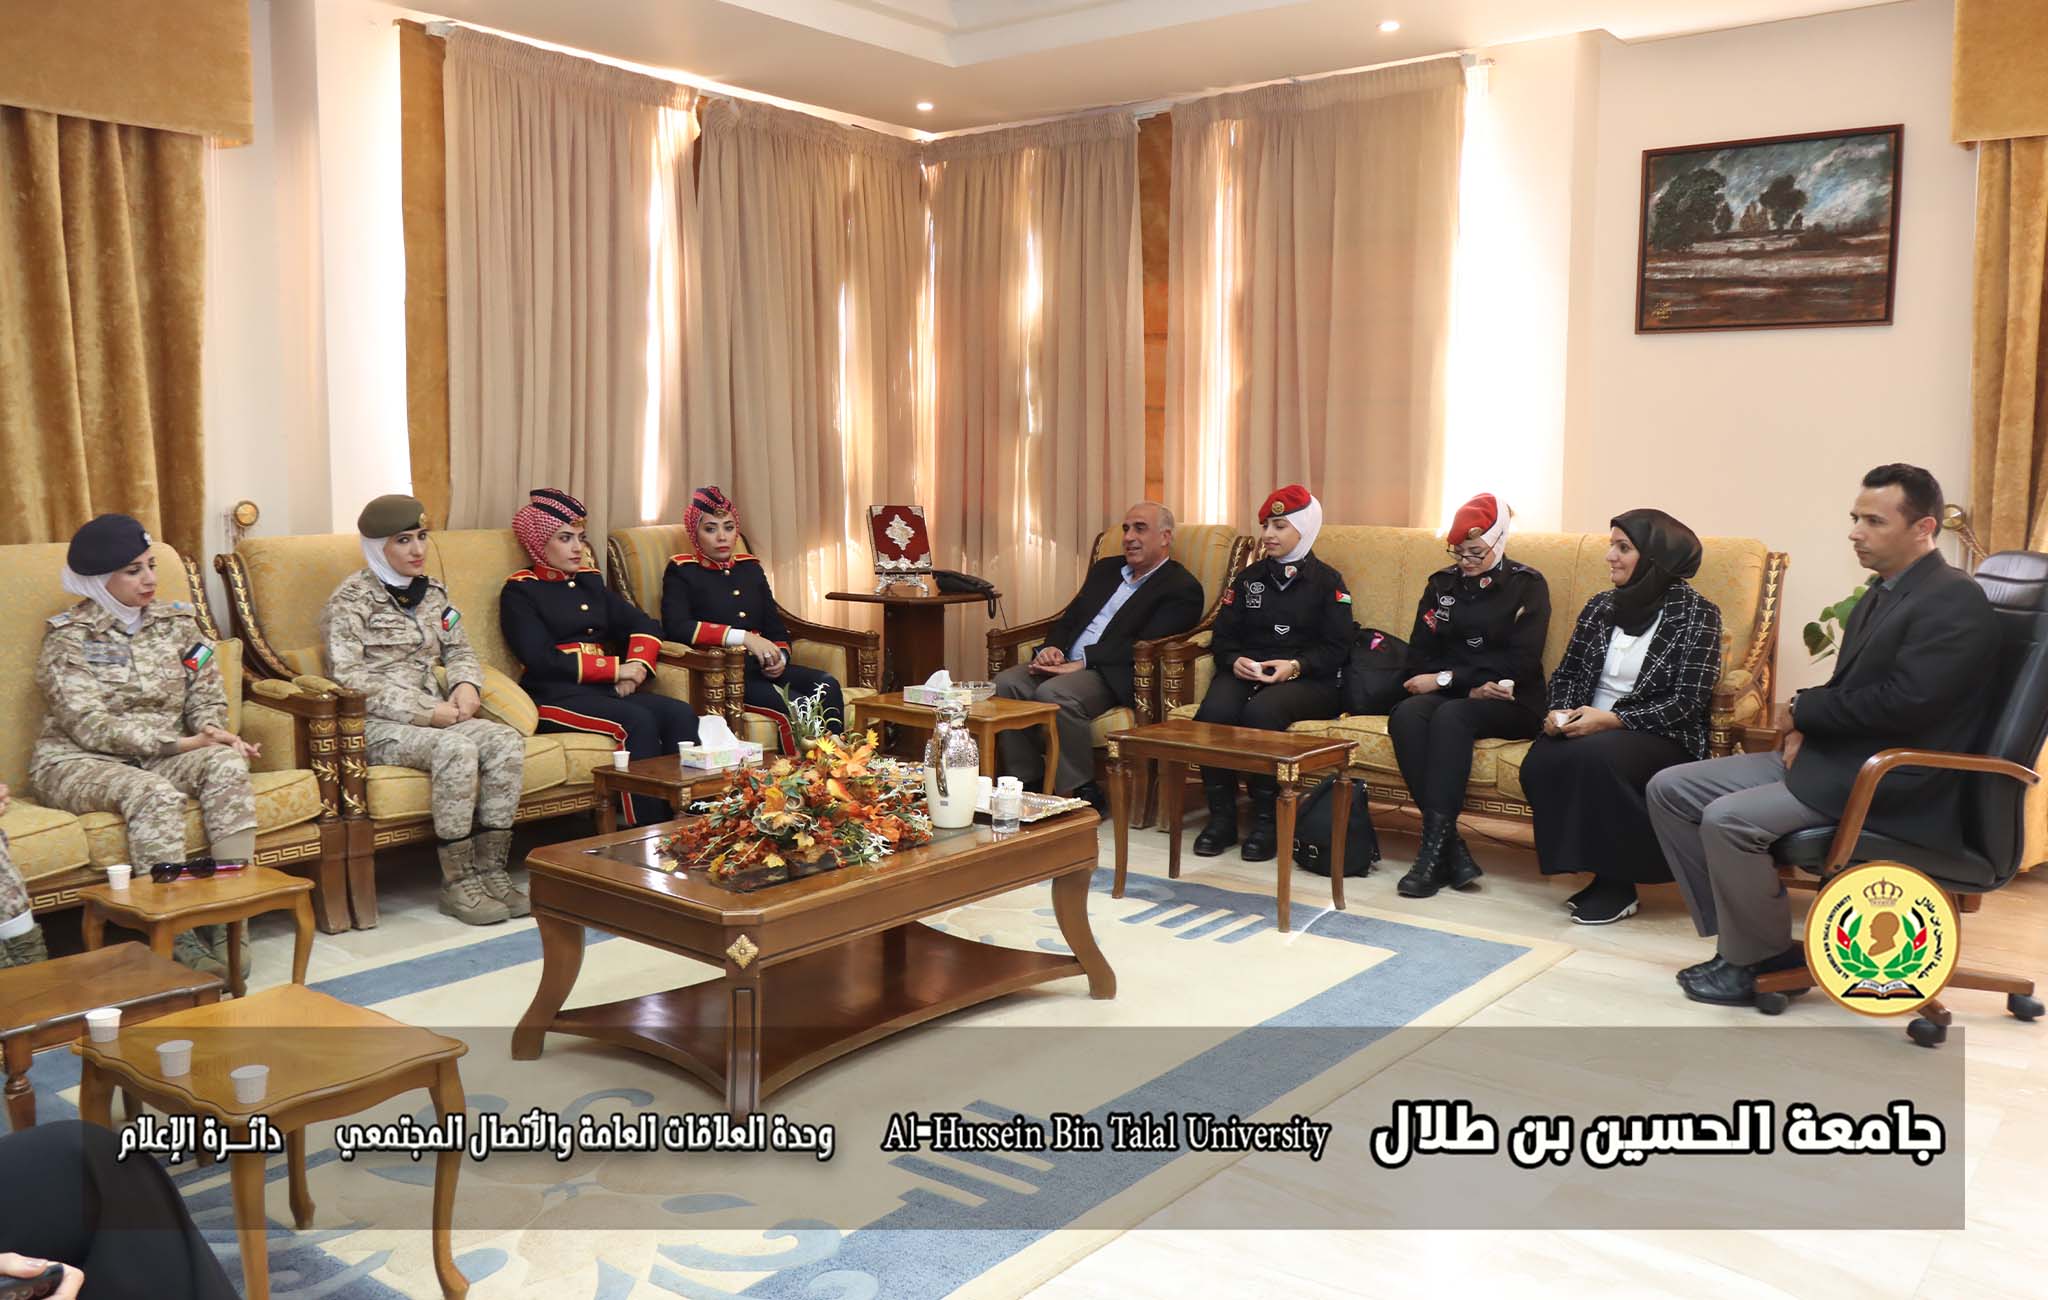 An event at the university to talk about the role of women in the Jordanian Armed Forces